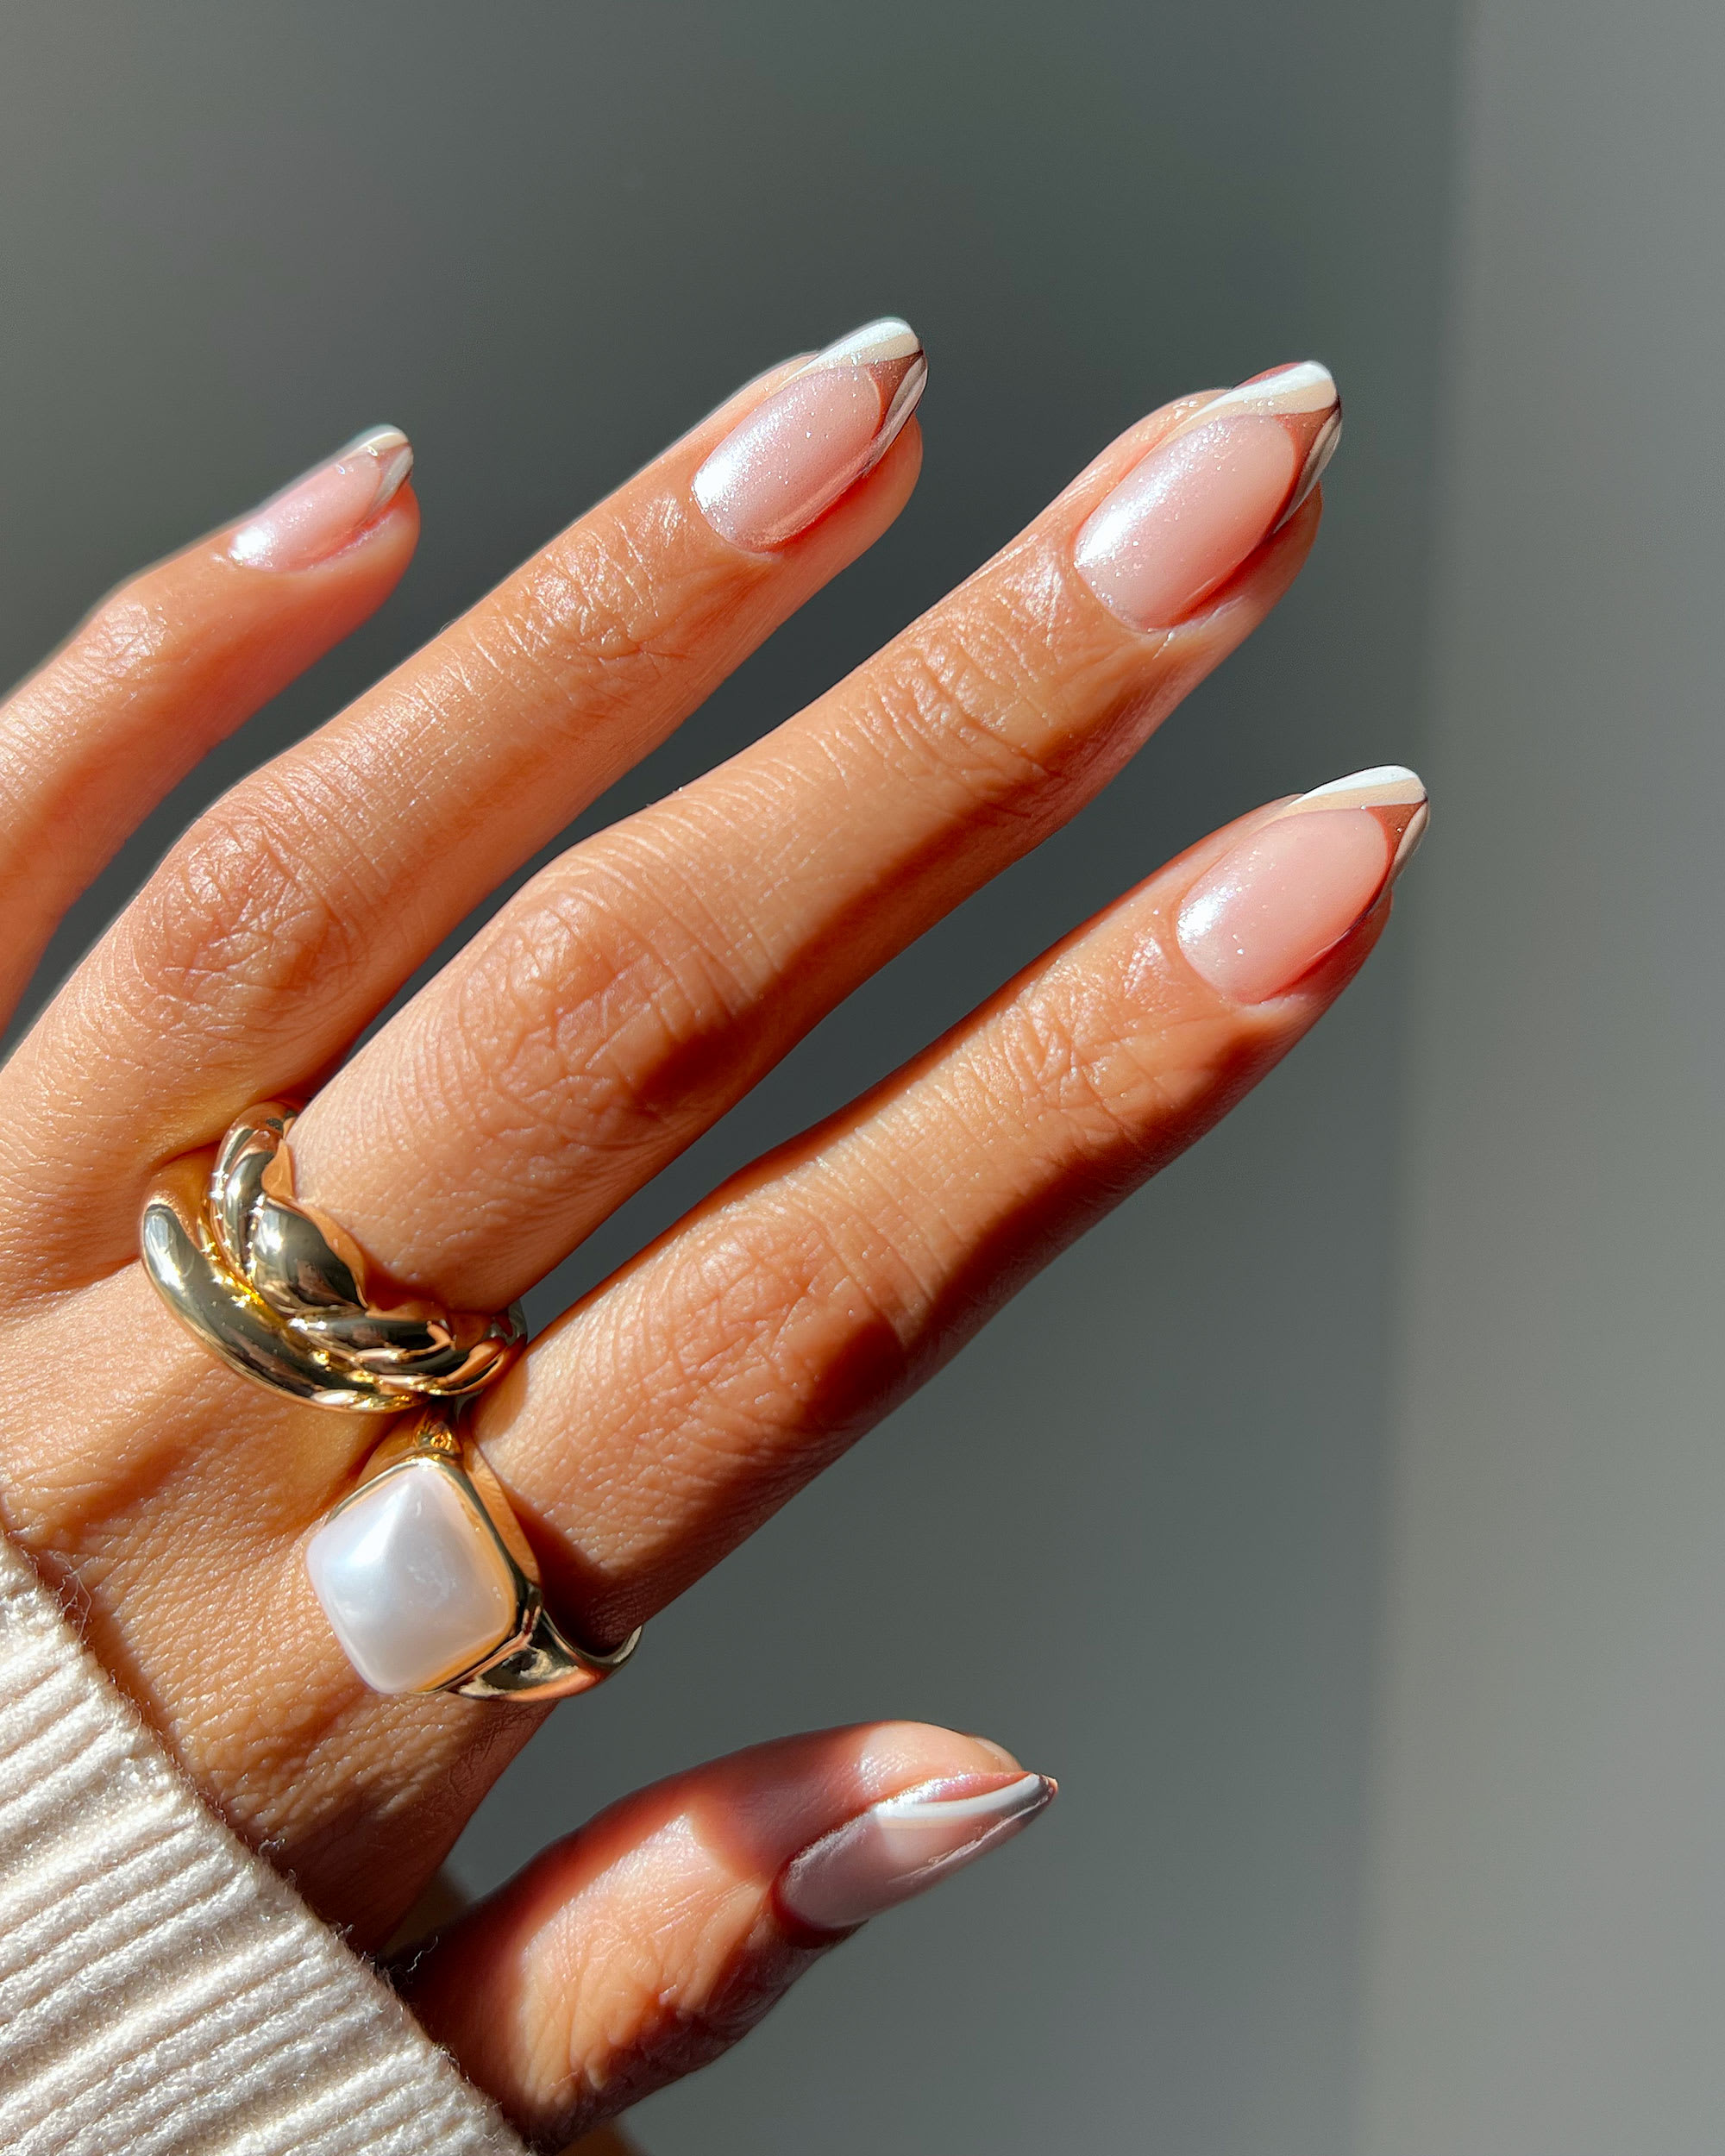 Glitter Nail Art: Neutral Nails With Gold Deco Lines -  Fashion  Blog